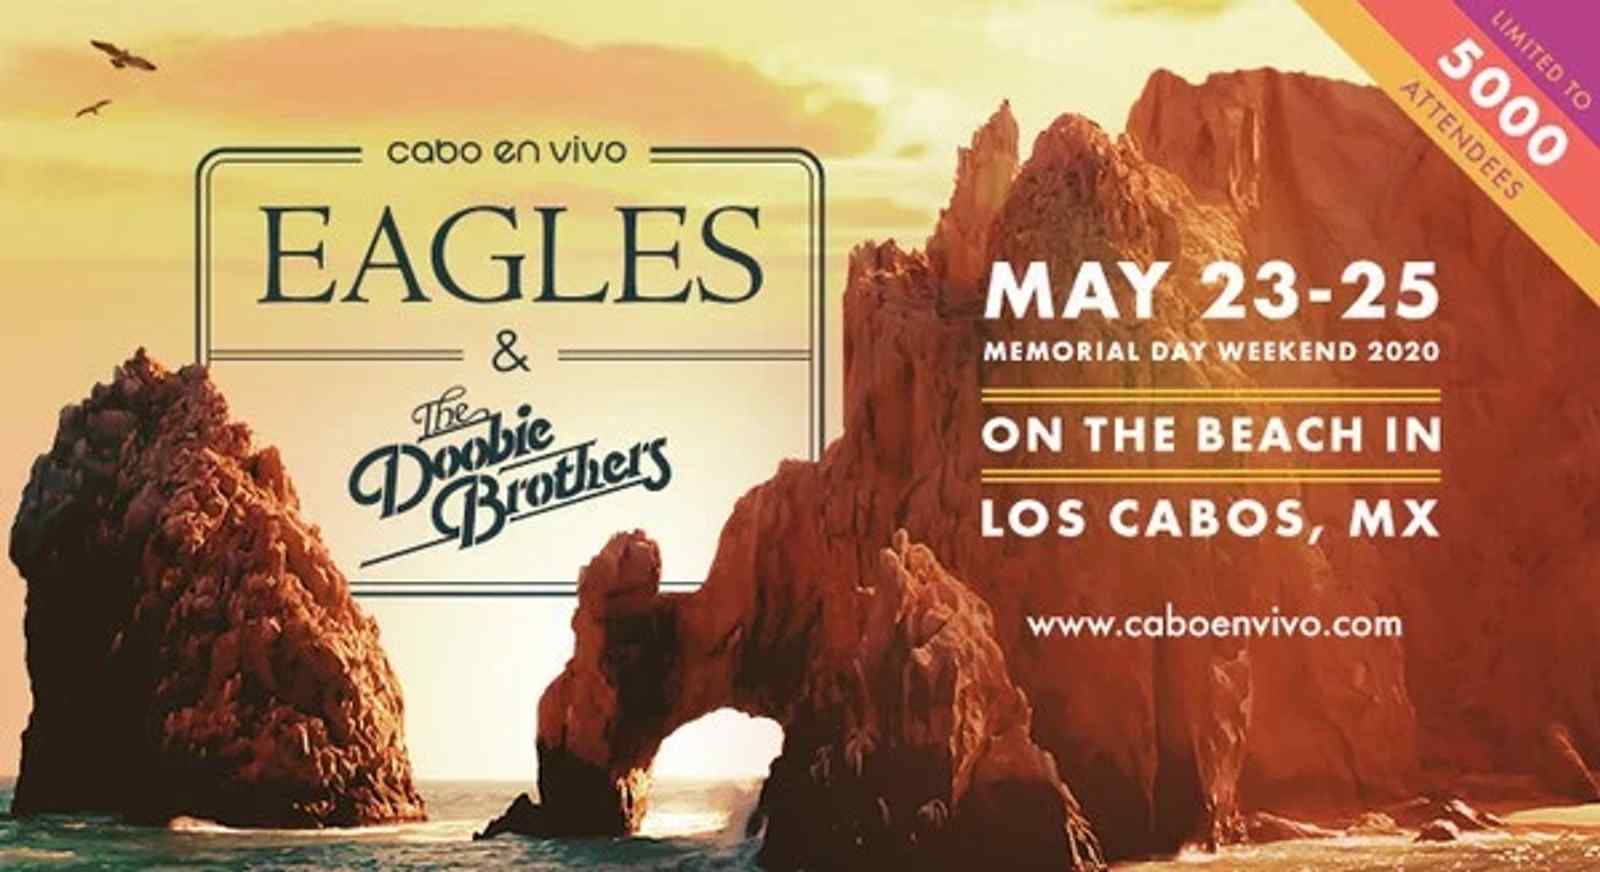 Cabo En Vivo Presents Eagles and The Doobie Brothers